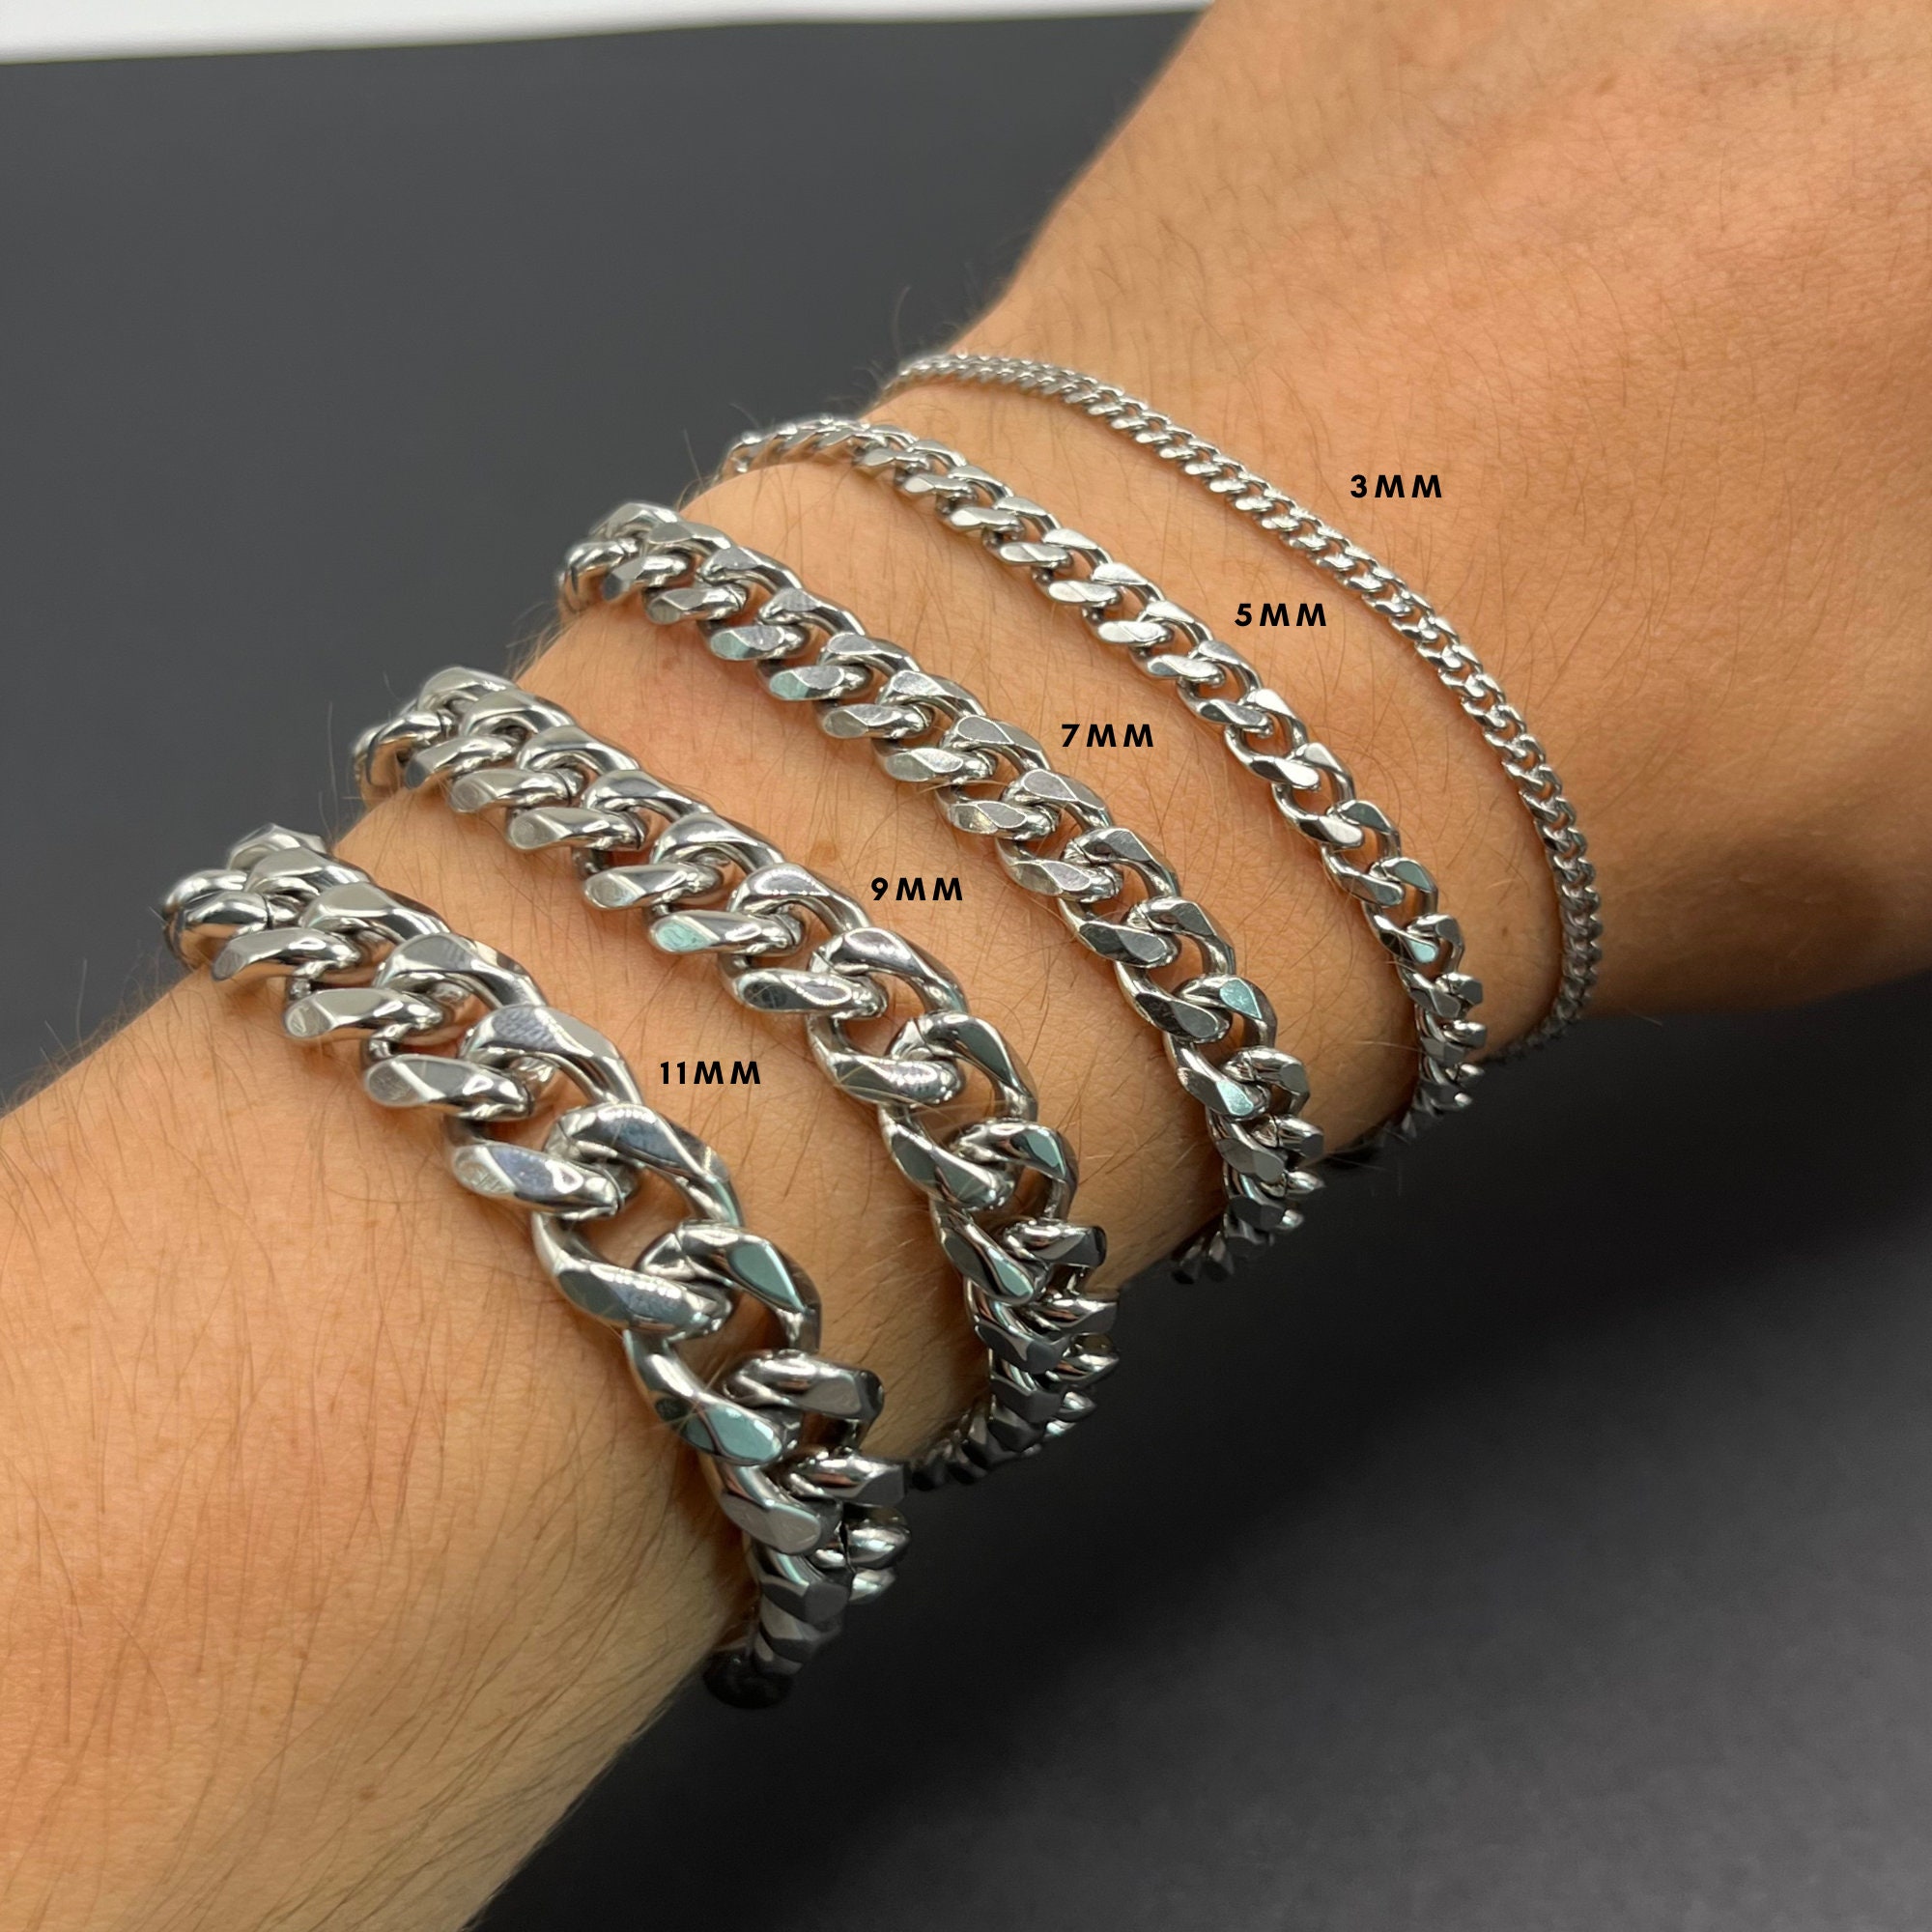 Silver Mens Bracelet | Curb Chain Silver bracelets | man bracelets | mens woman's bracelet | Curb Link Bracelet Mens Woman Jewellery | Gift